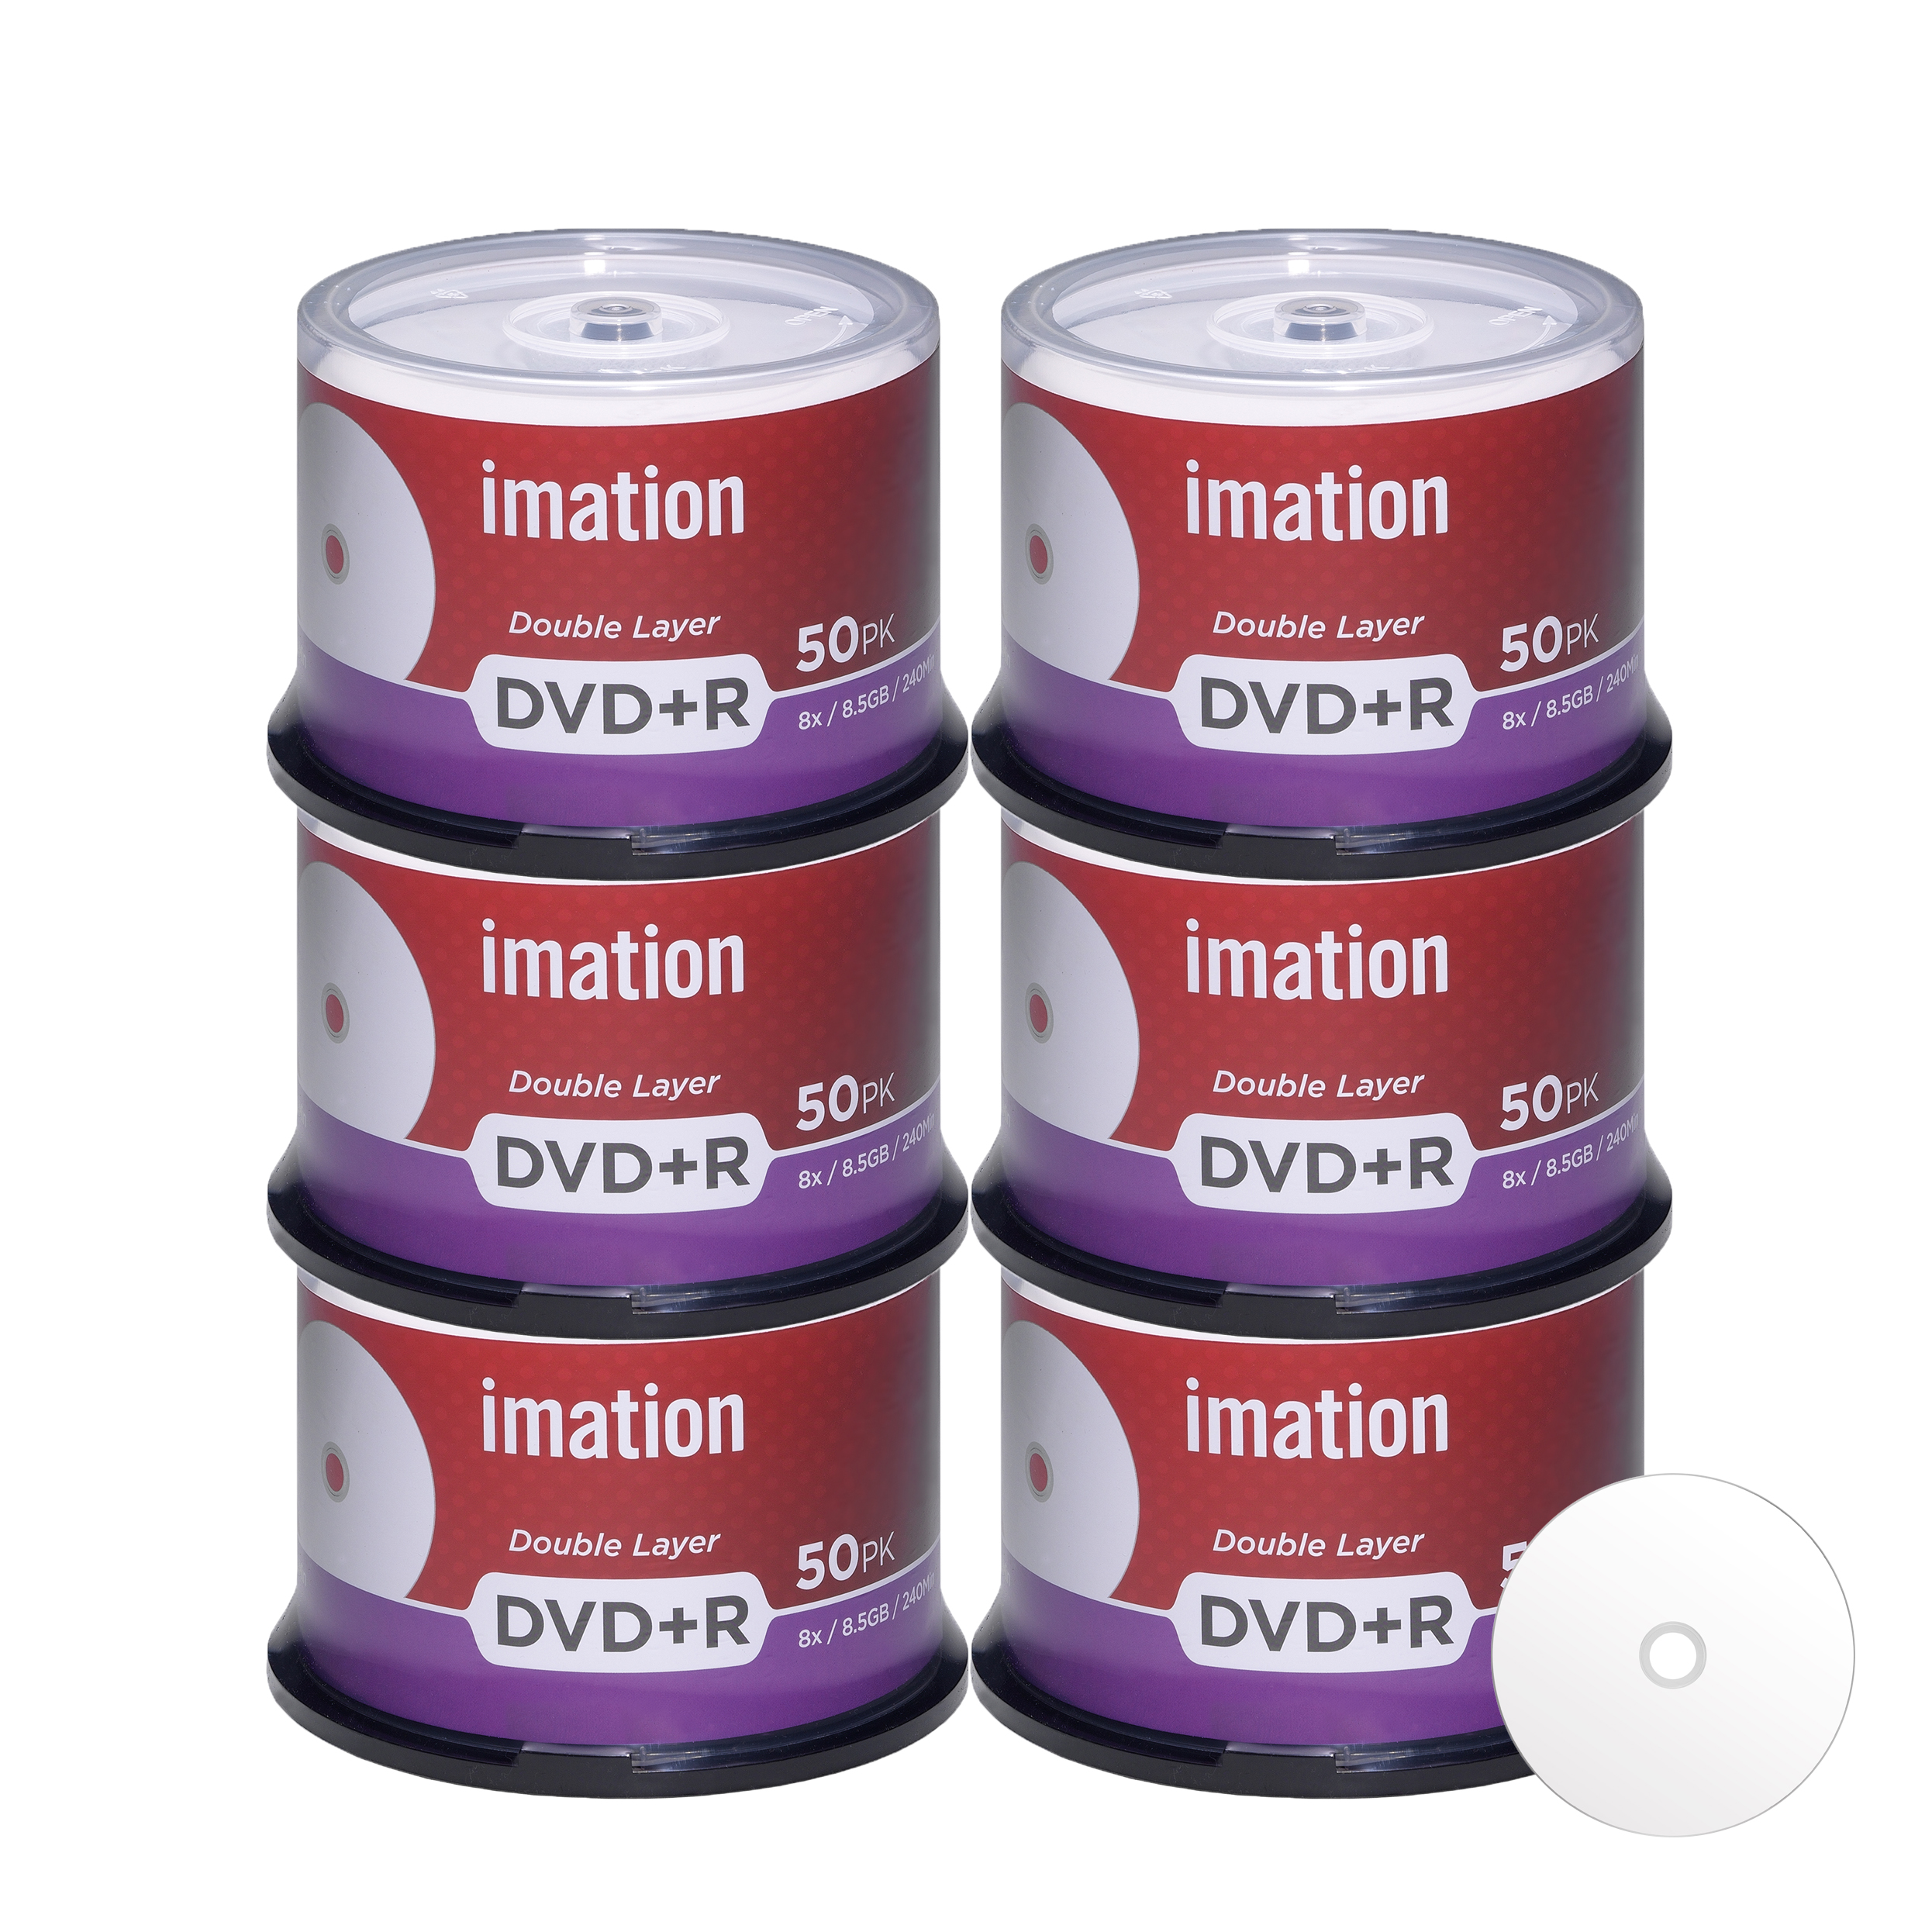 300 Pack Imation DVD+R DL Dual Layer 8X 8.5GB DVD Plus R Double Layer White Inkjet Hub Printable Blank Media Data Movie Game Recordable Disc - image 1 of 2